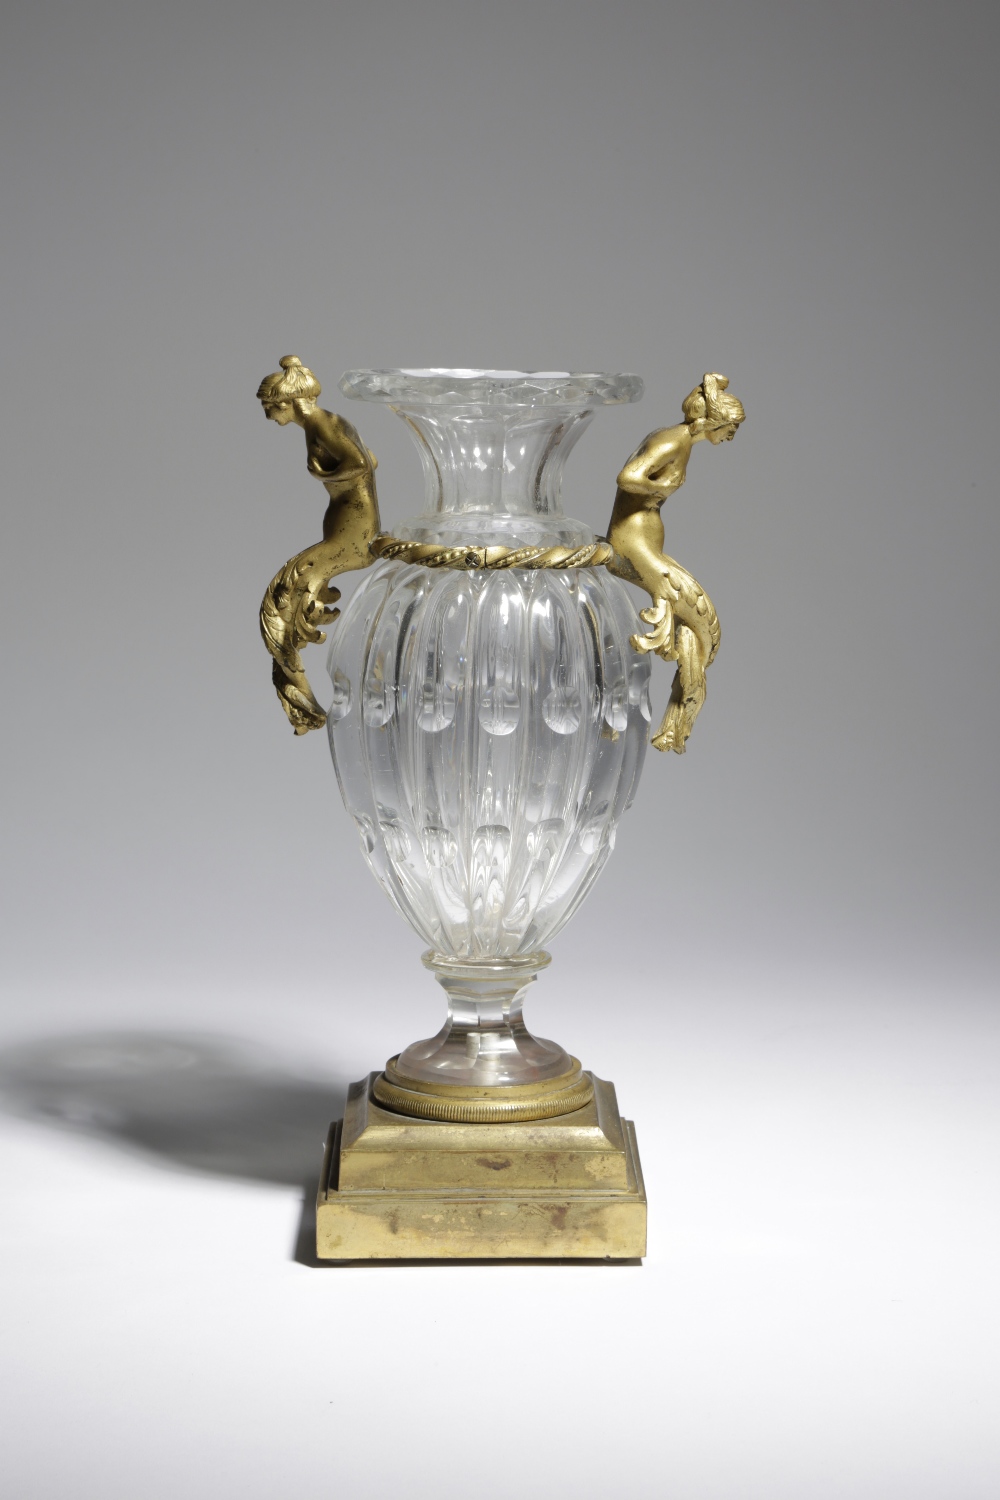 A FRENCH CUT-GLASS AND ORMOLU MOUNTED VASE LATE 19TH CENTURY the fluted and lobed urn shape glass